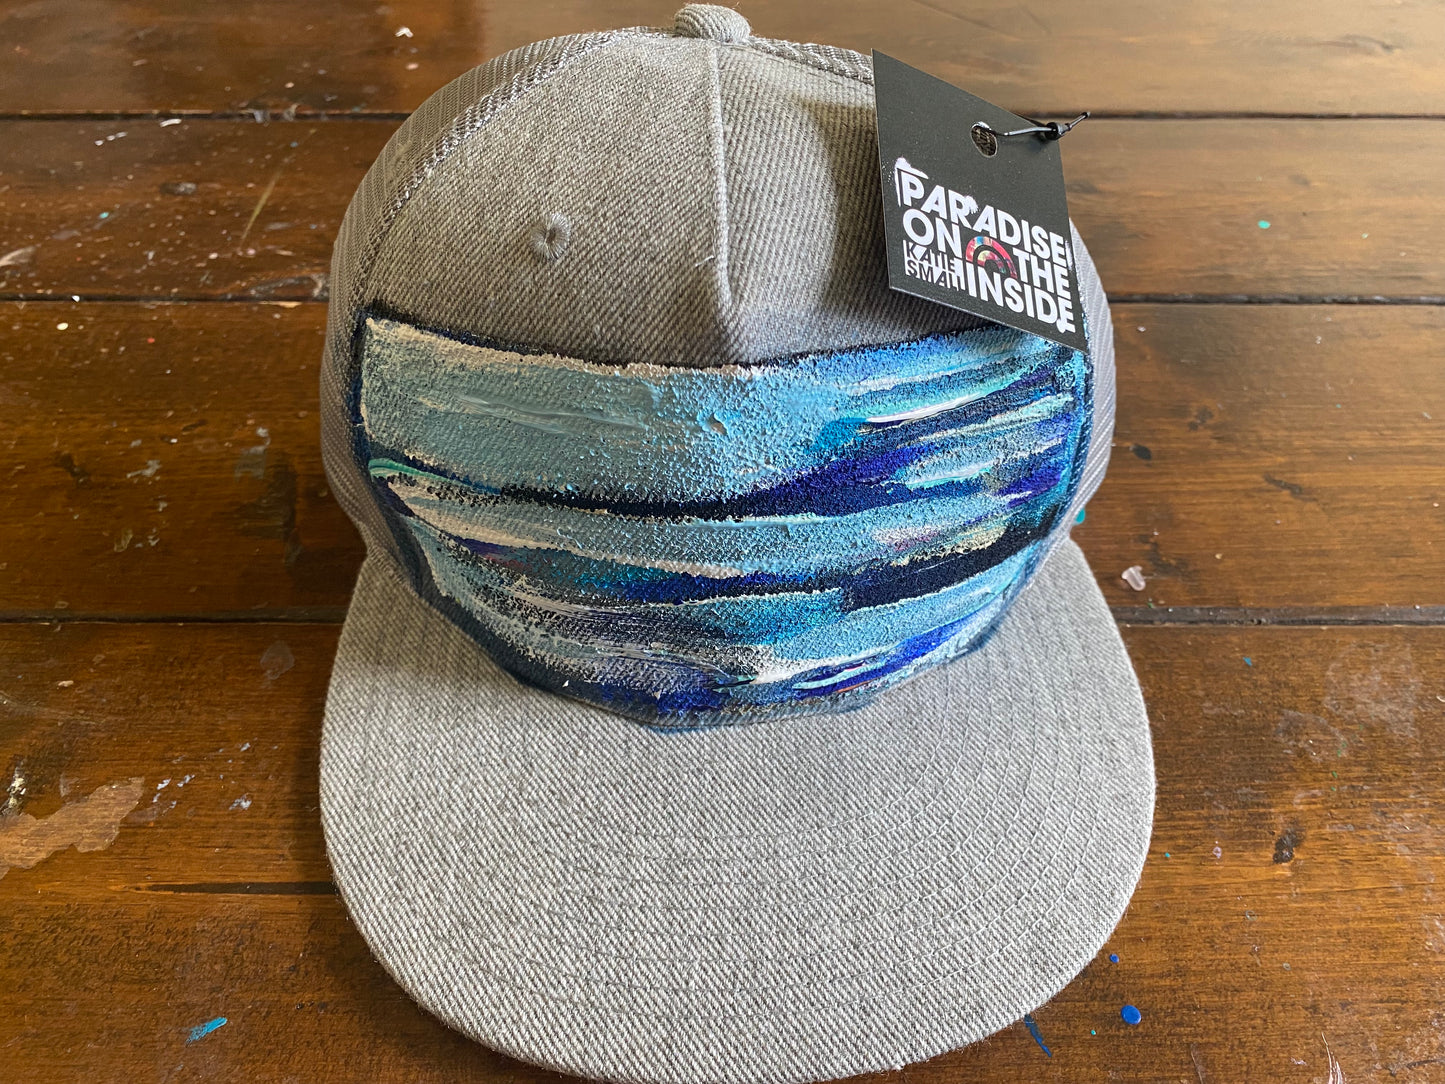 "Washed and cleansed" Flat-bill, adjustable trucker